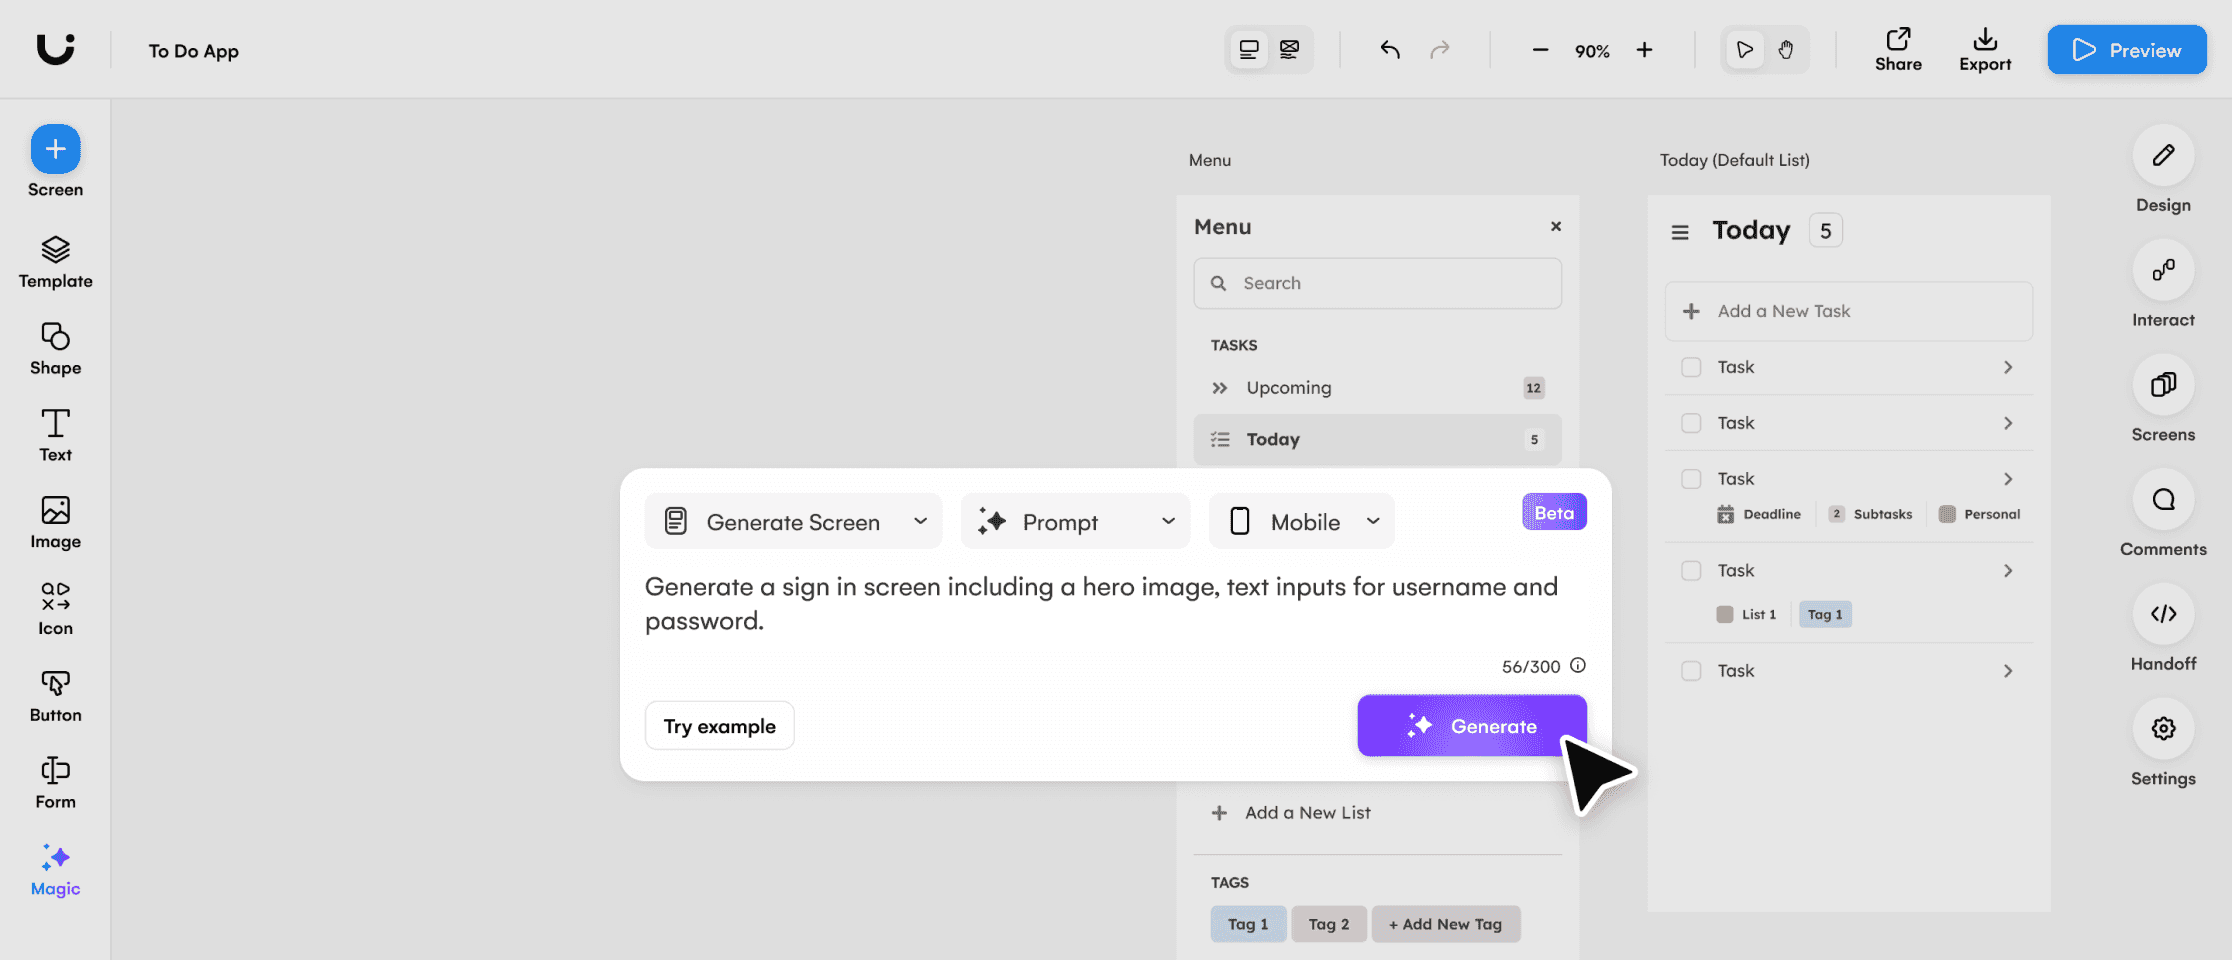 uizard interface showing a text prompt about to be clicked on in the editor